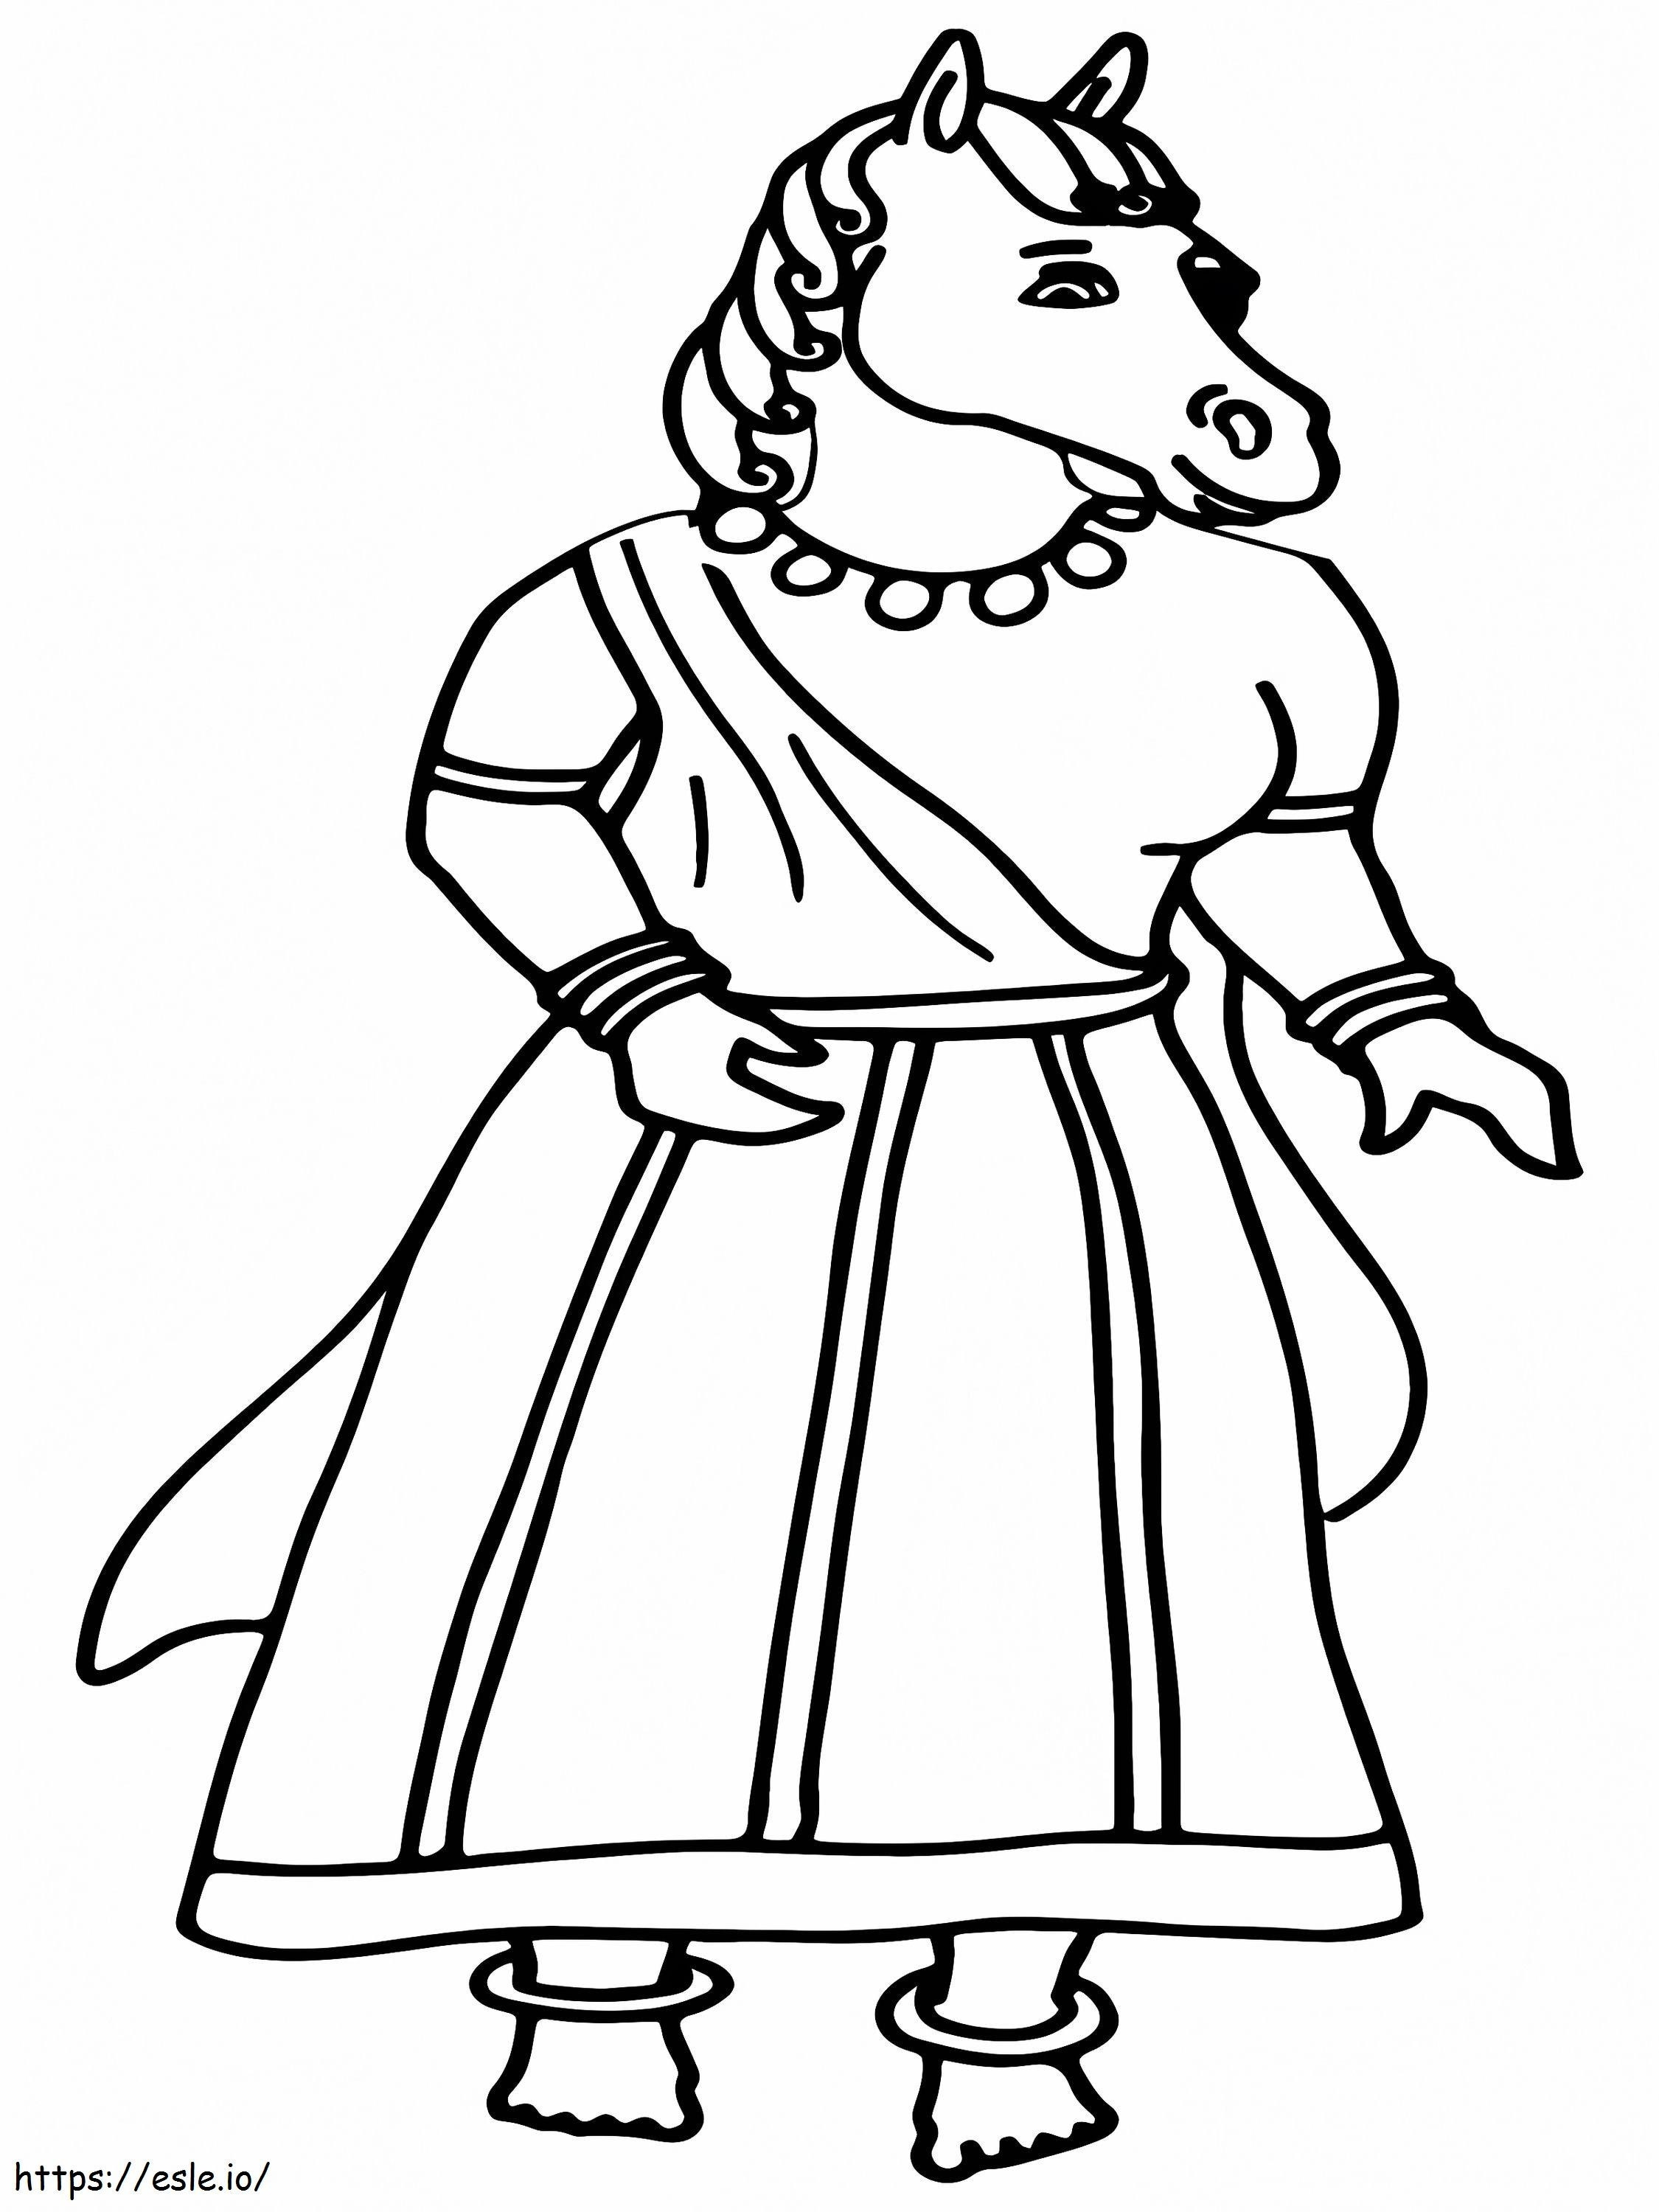 Delightful Beatrice Horseman coloring page